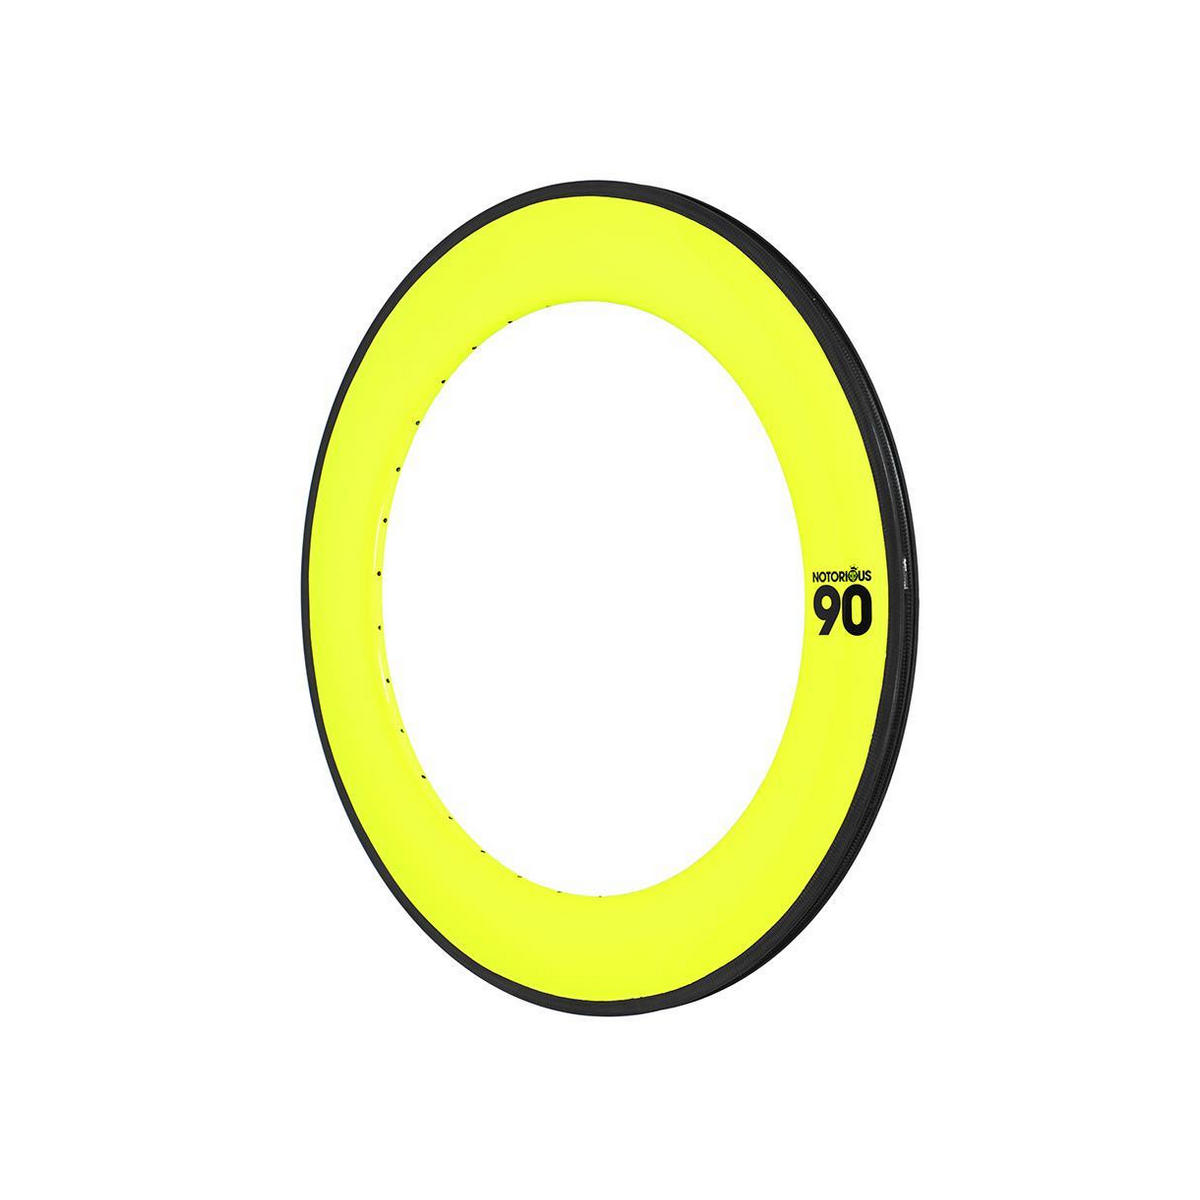 rim notorious 90 700c carbon 32h msw fluo yellow